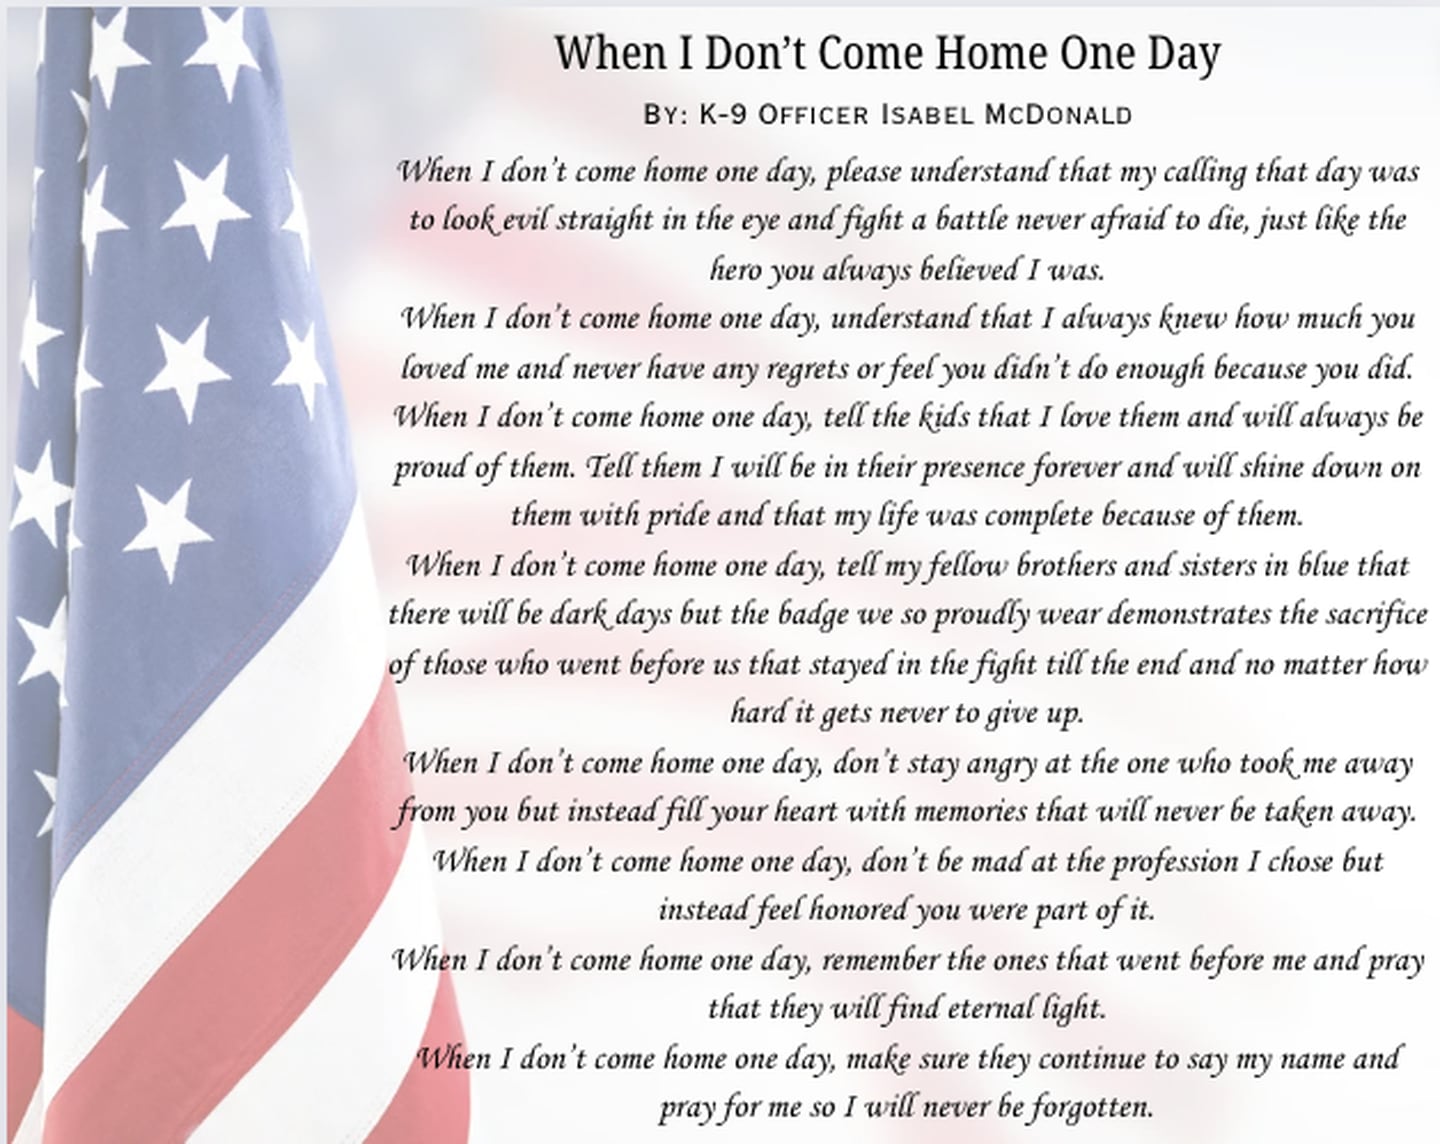 "When I Don't Come Home One Day," a poem by K-9 Officer Isabel McDonald